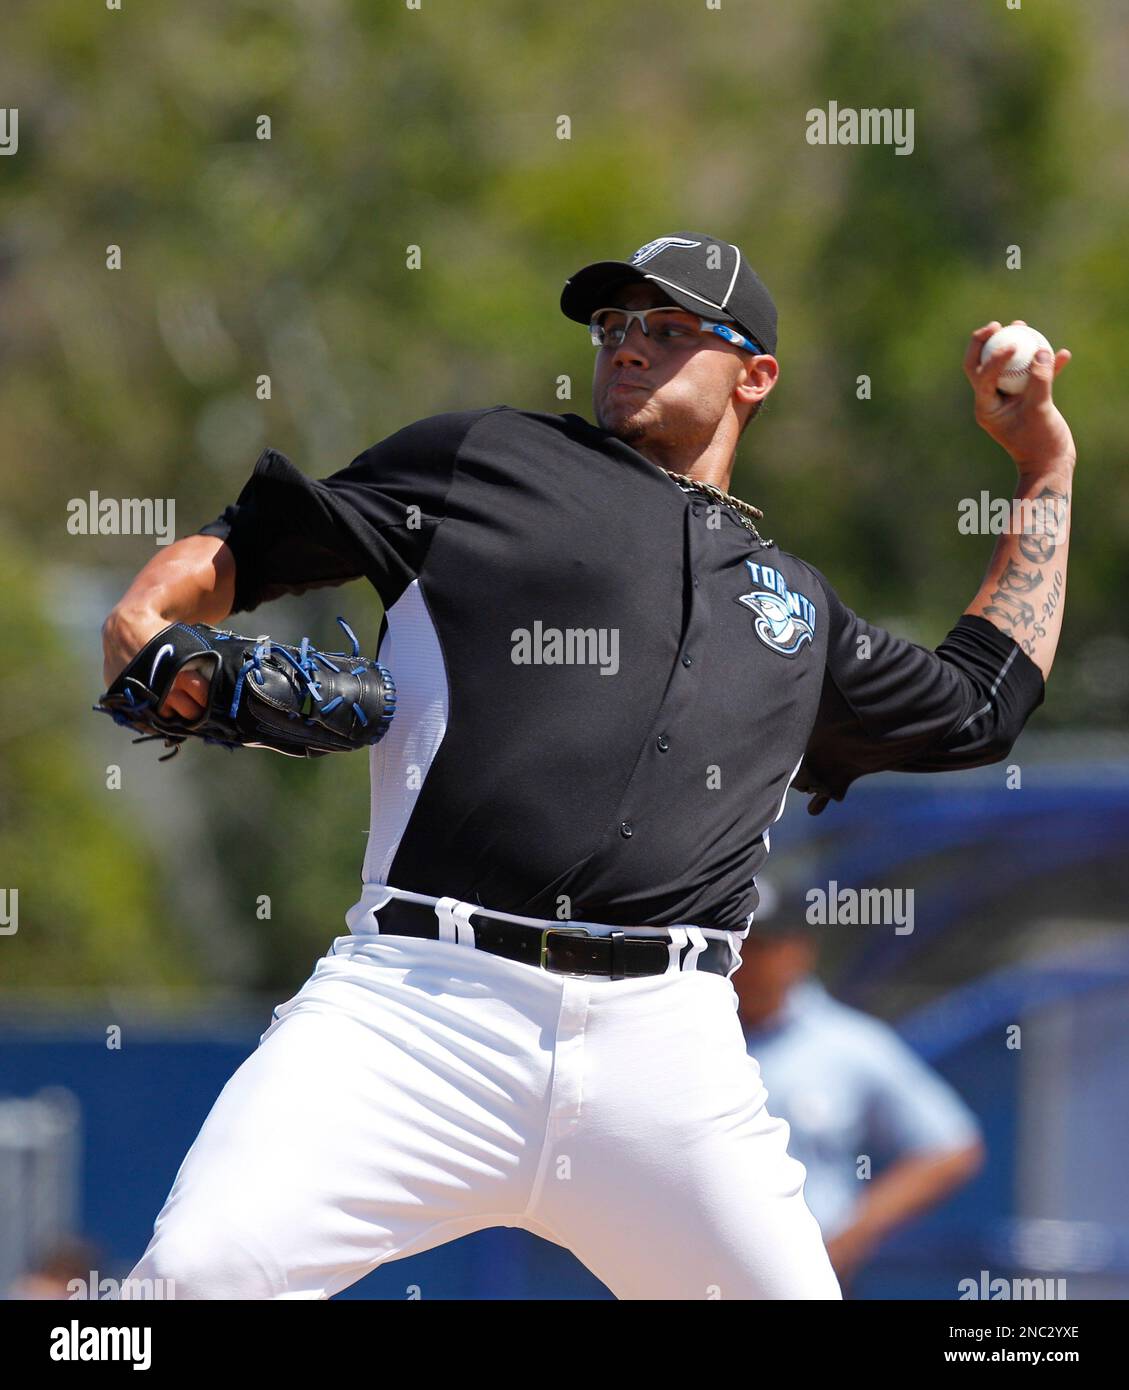 Toronto Blue Jays starting pitcher Brett Cecil winds up against the Atlanta Braves in their spring training baseball game at Florida Auto Exchange Stadium in Dunedin, Fla., Thursday, March 24, 2011. (AP Photo/Kathy Willens) Stock Photo